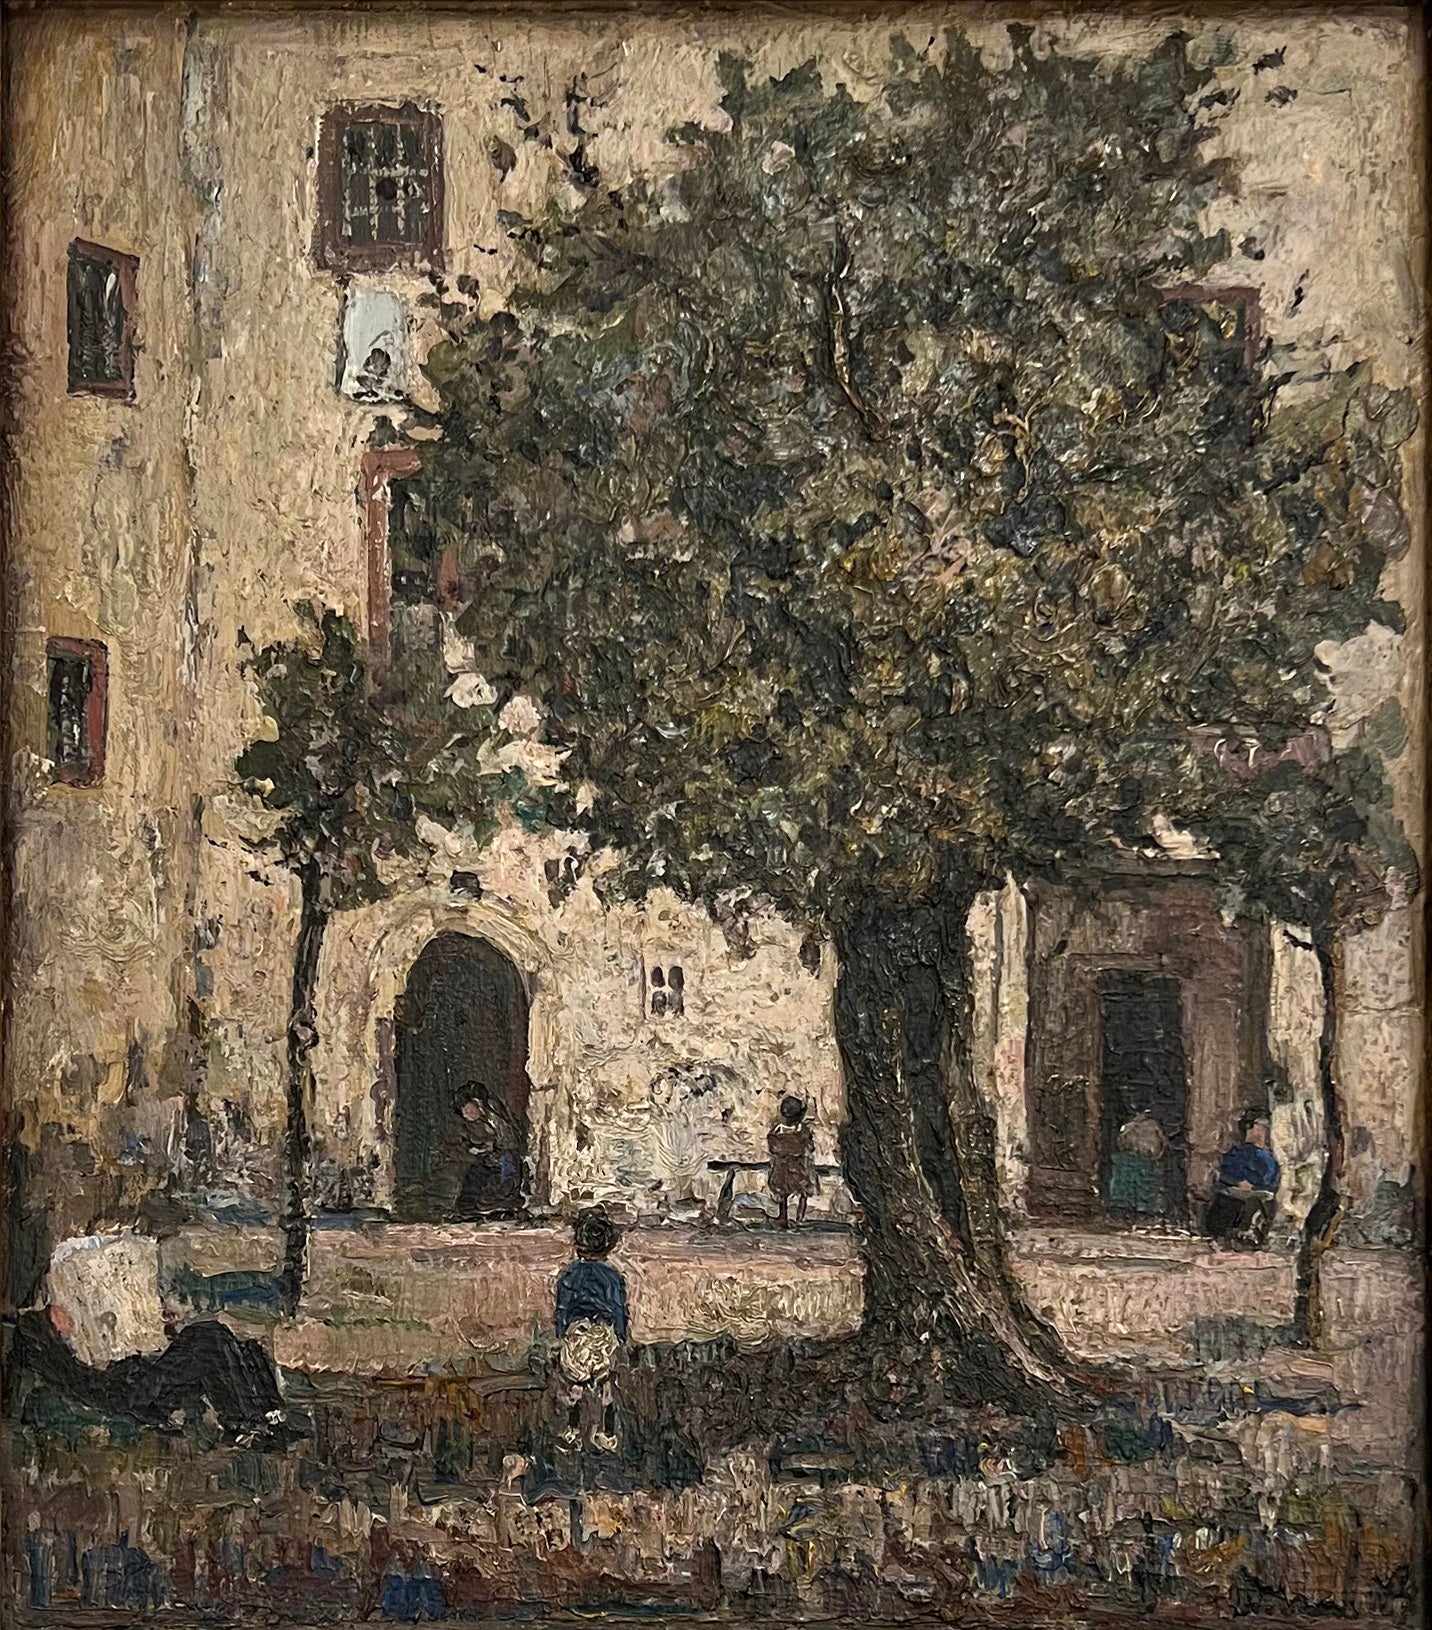 Figures in a Courtyard